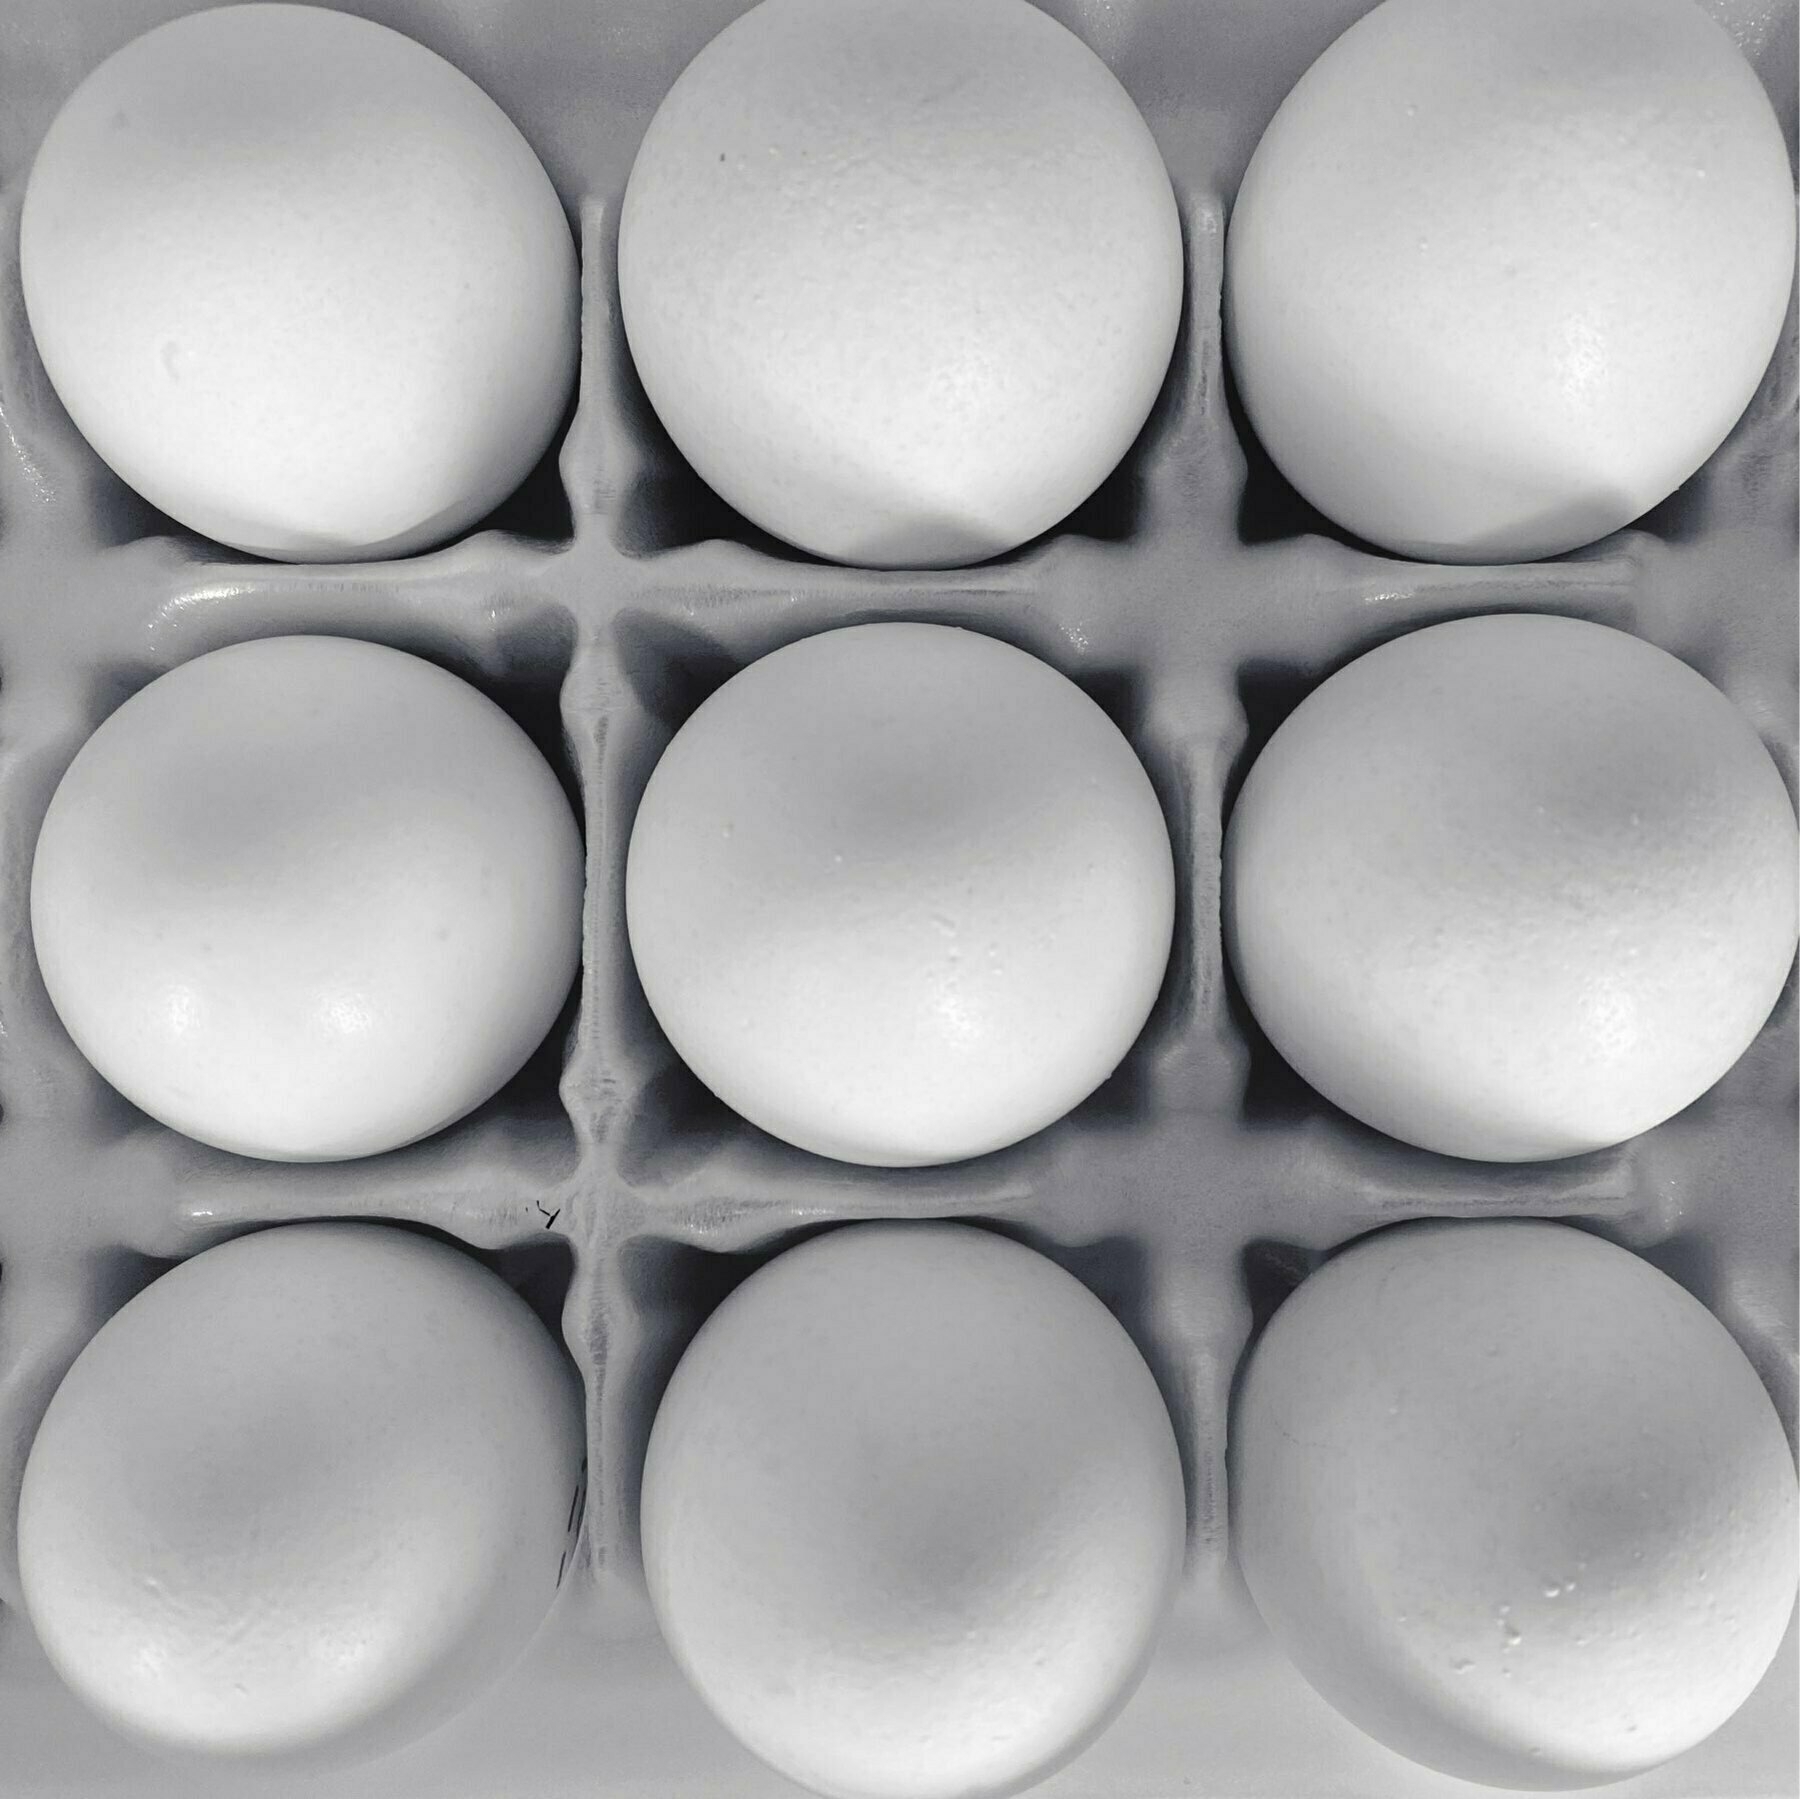 a top-down view of the inside of an egg carton